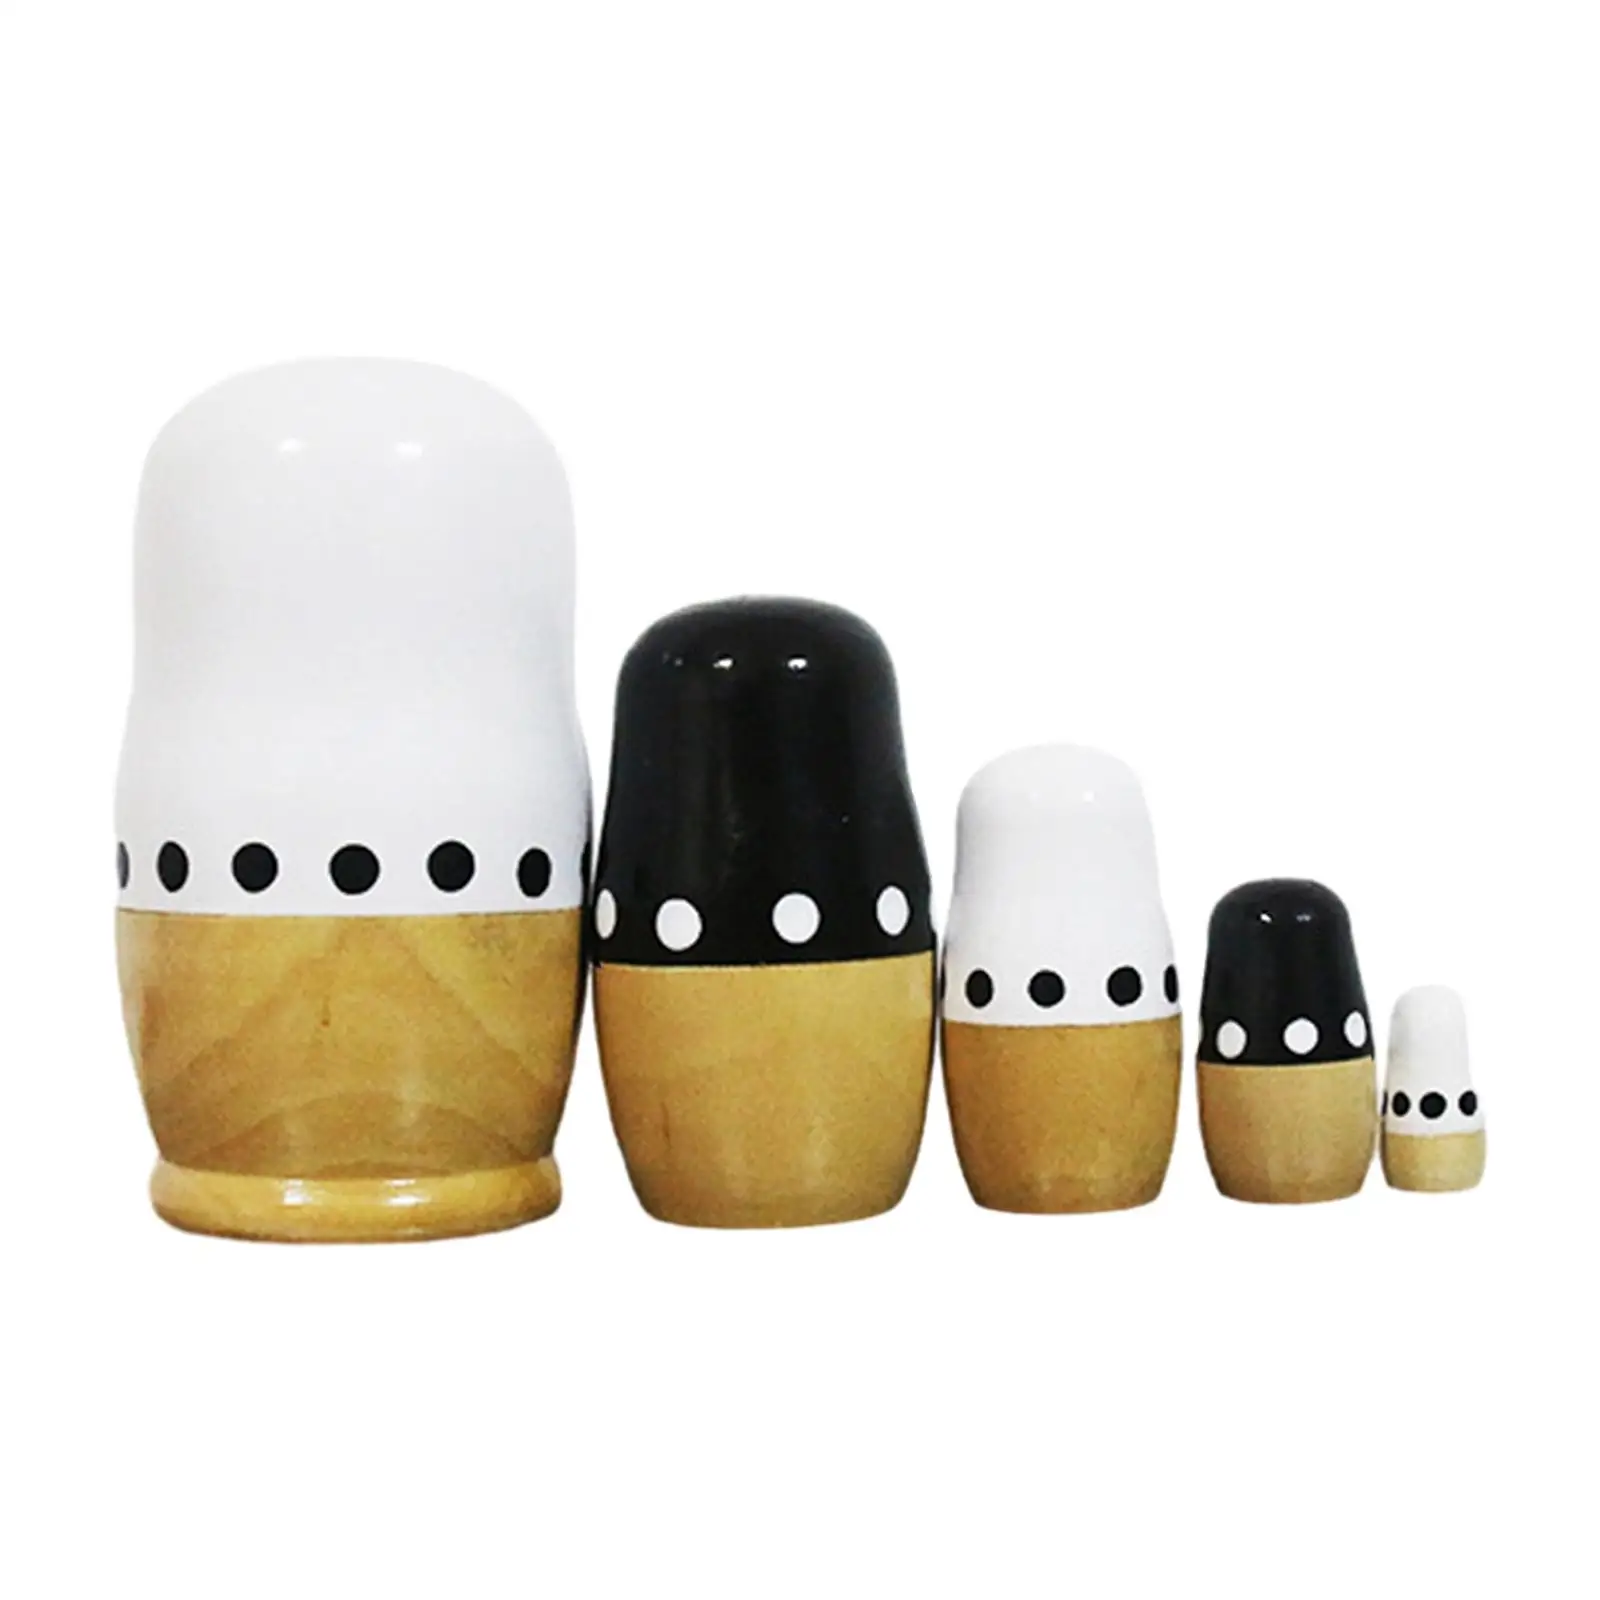 5 Pieces Nesting Dolls Kids Gifts Matryoshka Crafts for Halloween Home Kid